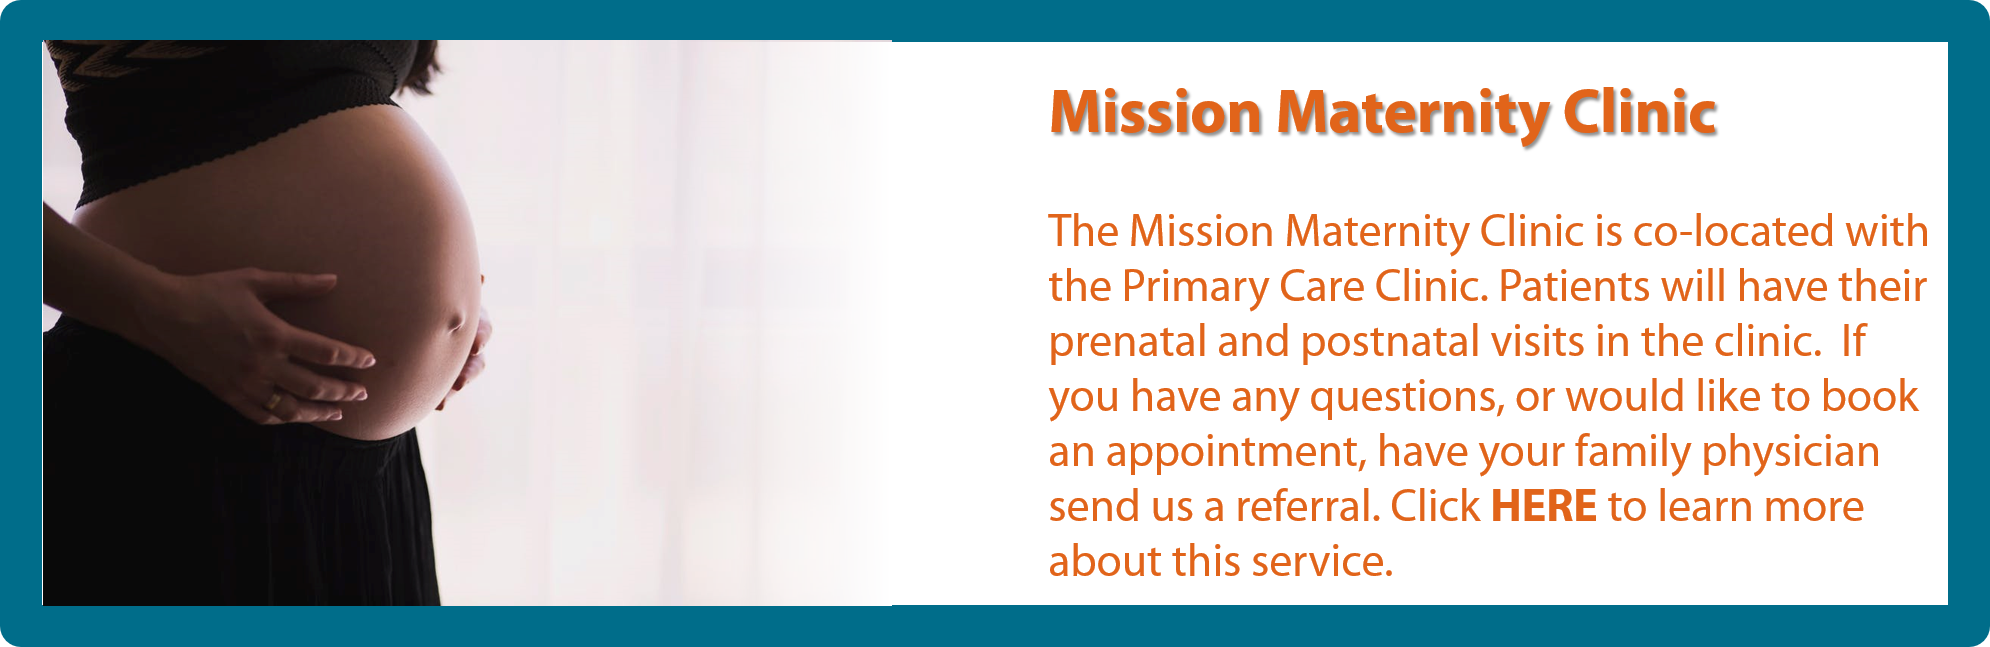 Mission Maternity Clinic.png